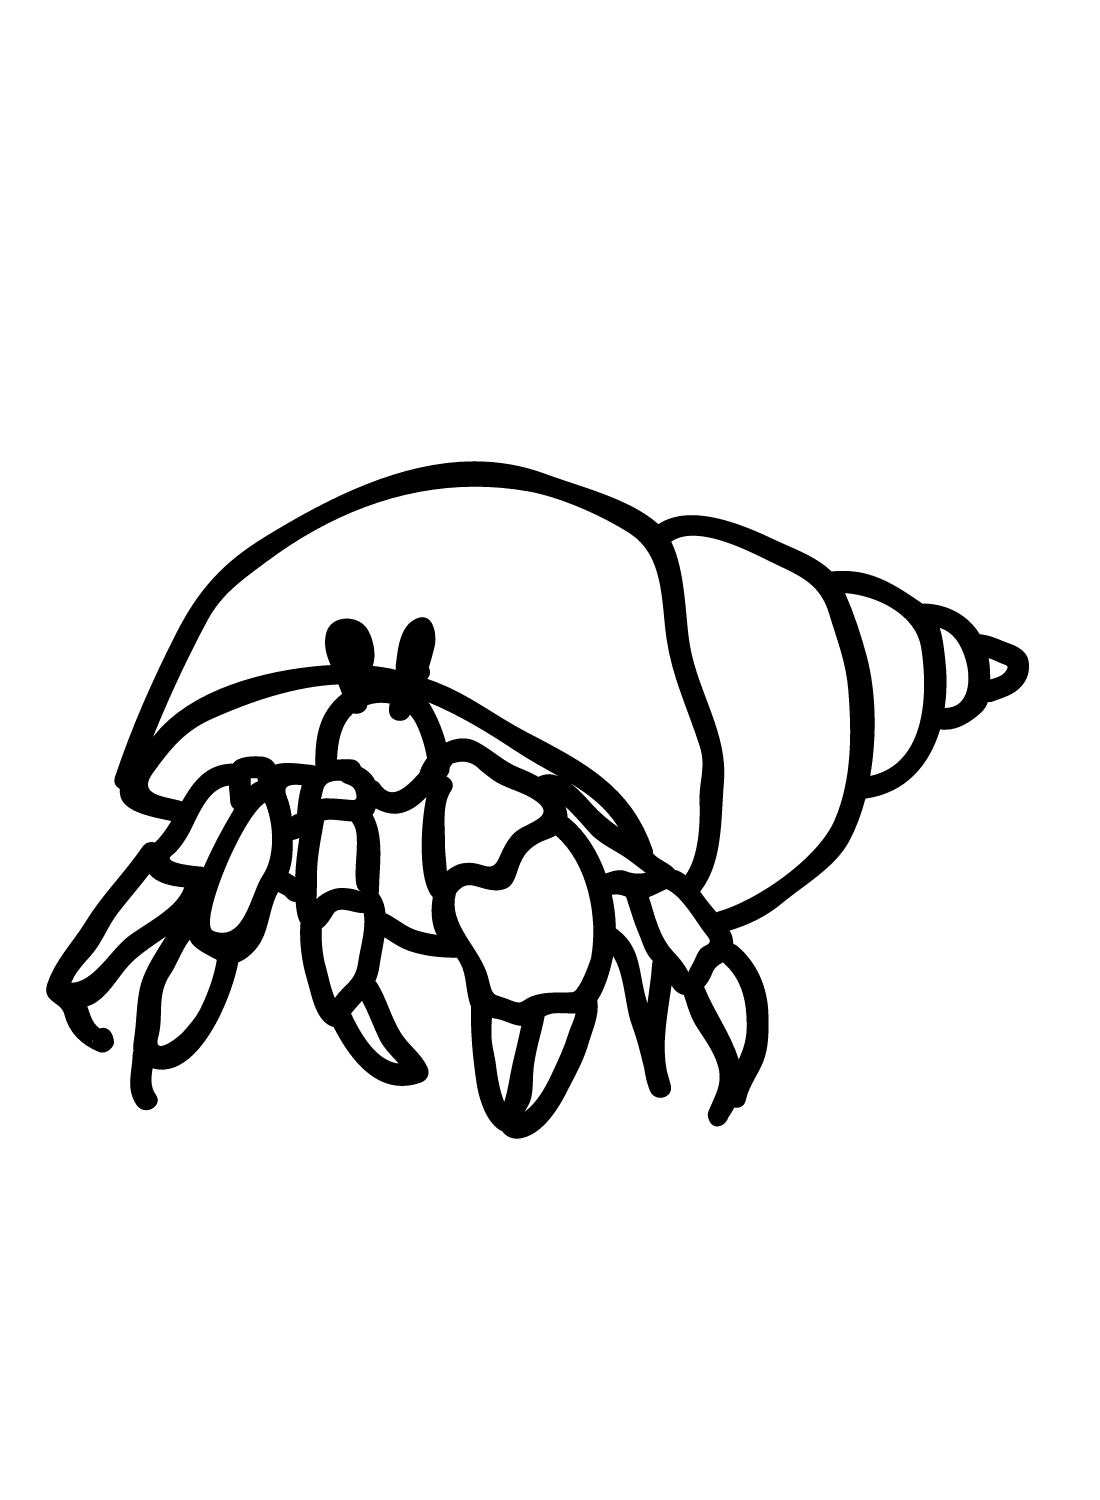 How to Draw a Crab - Easy Drawing Tutorial For Kids